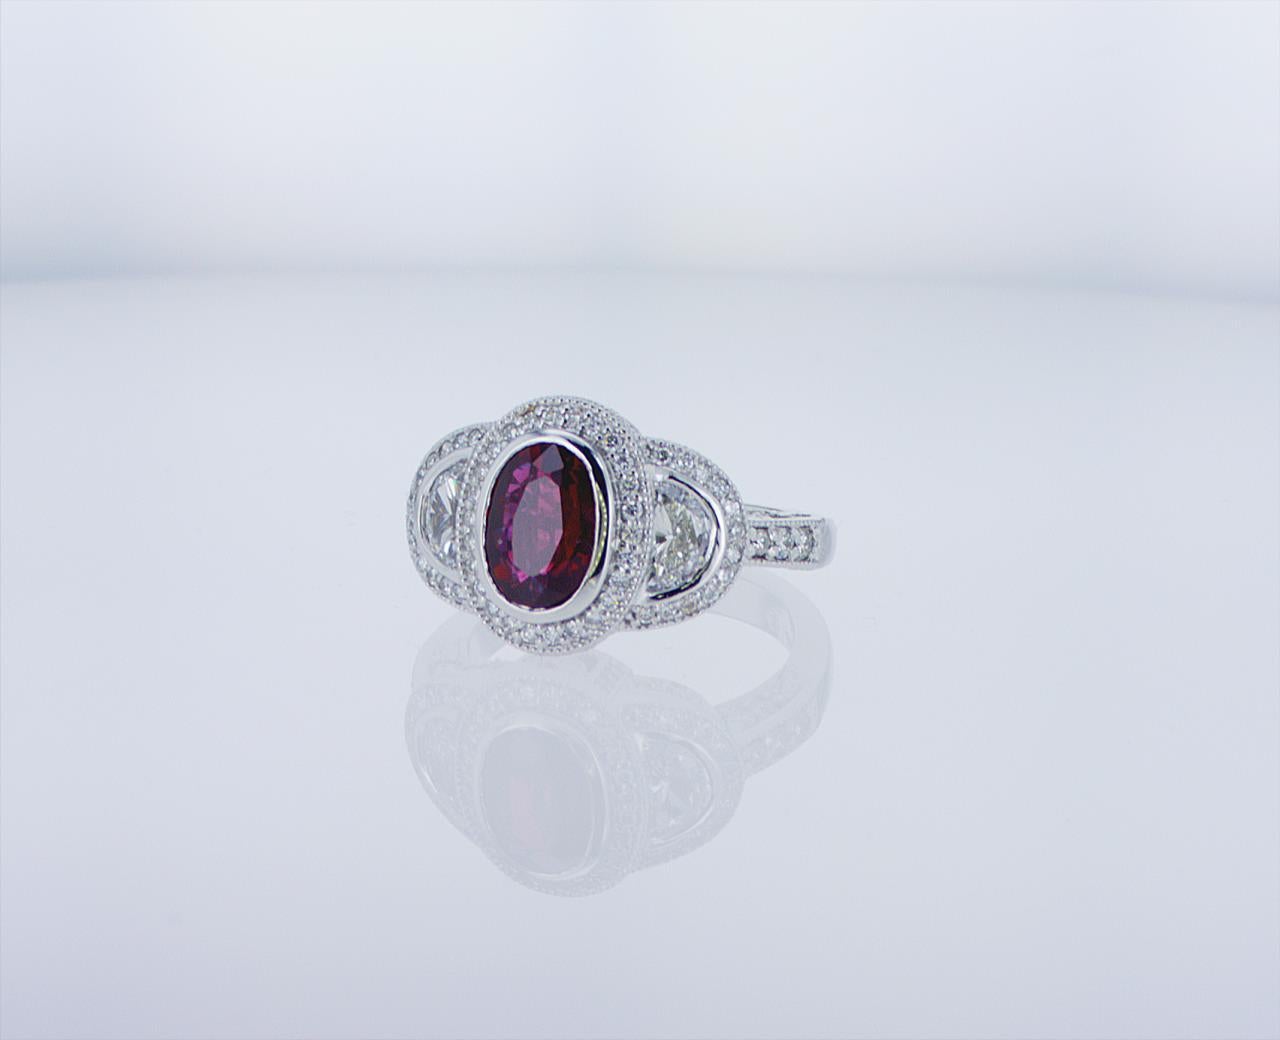 1.57ct Oval Ruby Cocktail Ring featuring 0.50ct Total Weight of Half Moon Diamonds and 0.55ct Total Weight of Round Diamonds in a Platinum Mounting.
